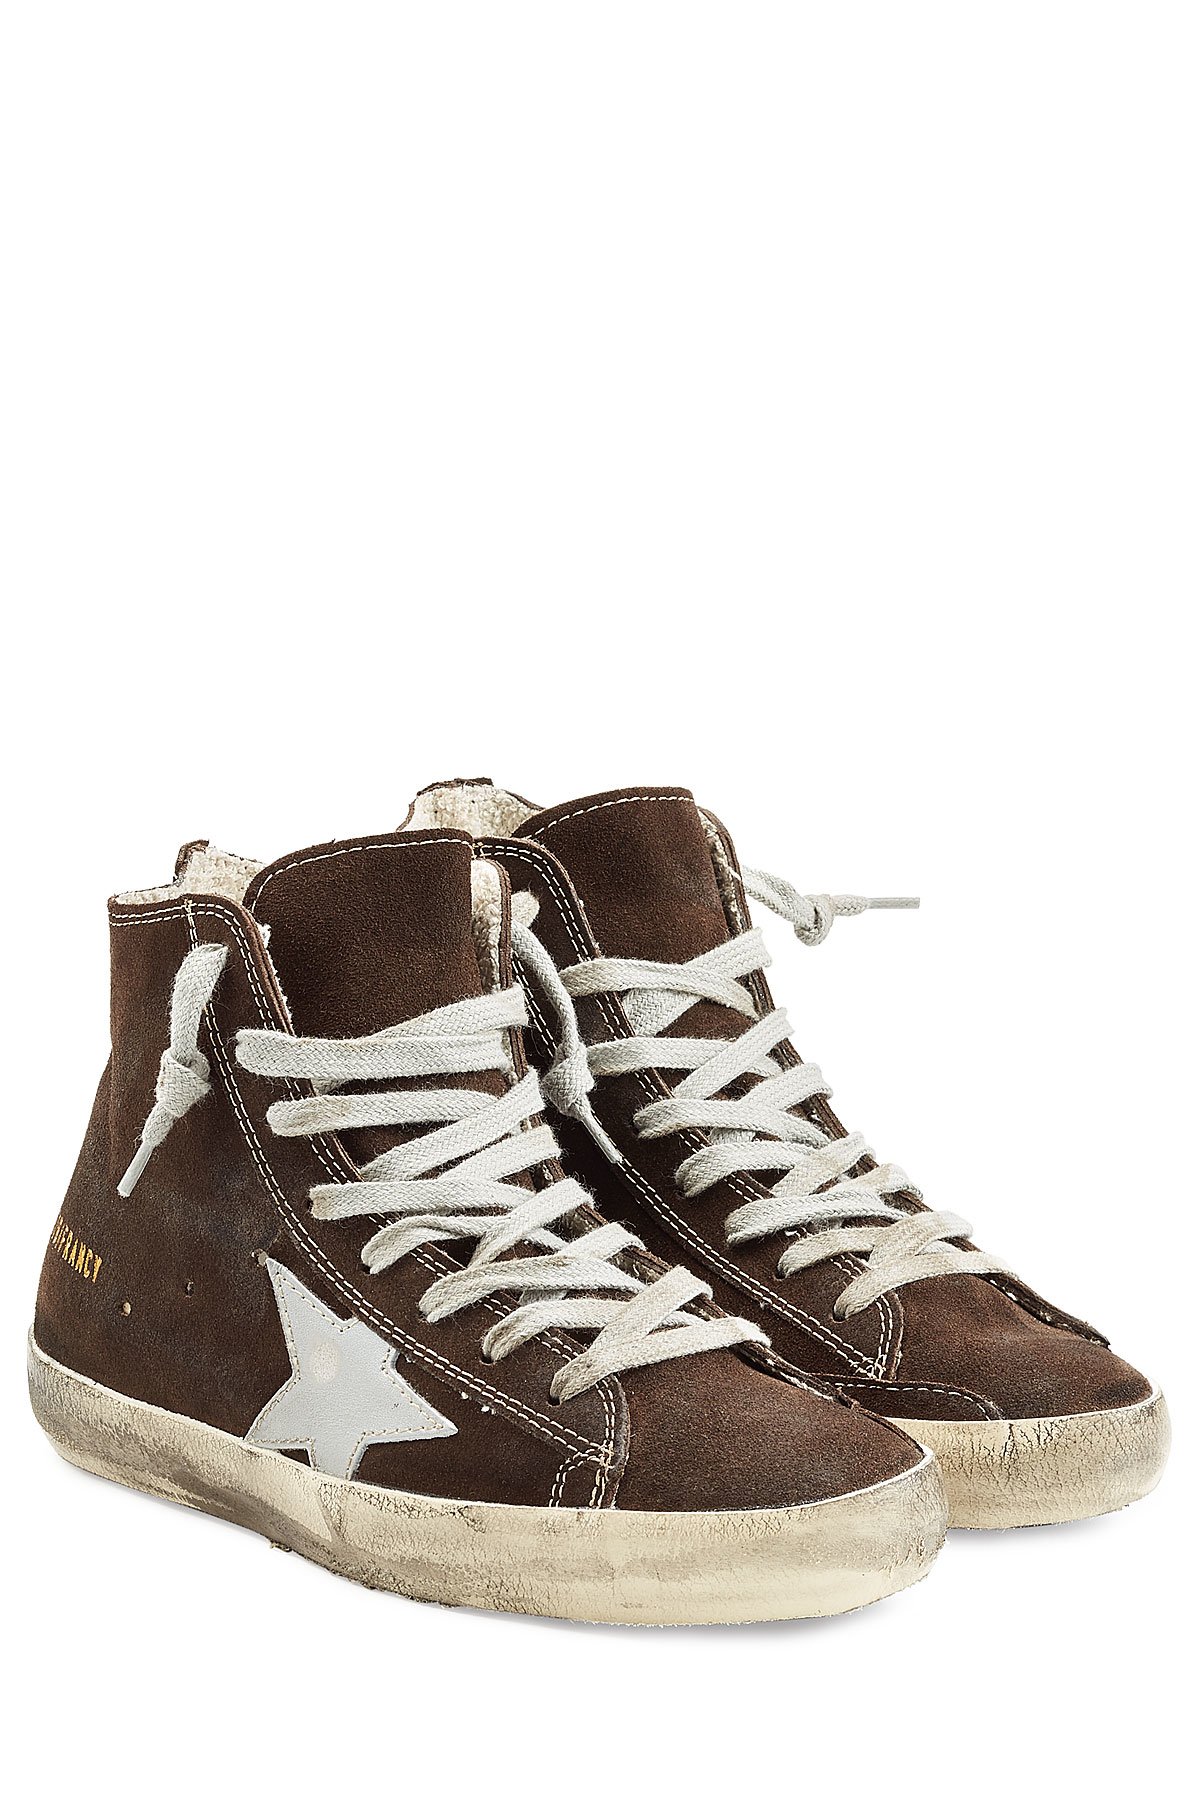 golden goose sneakers clearance